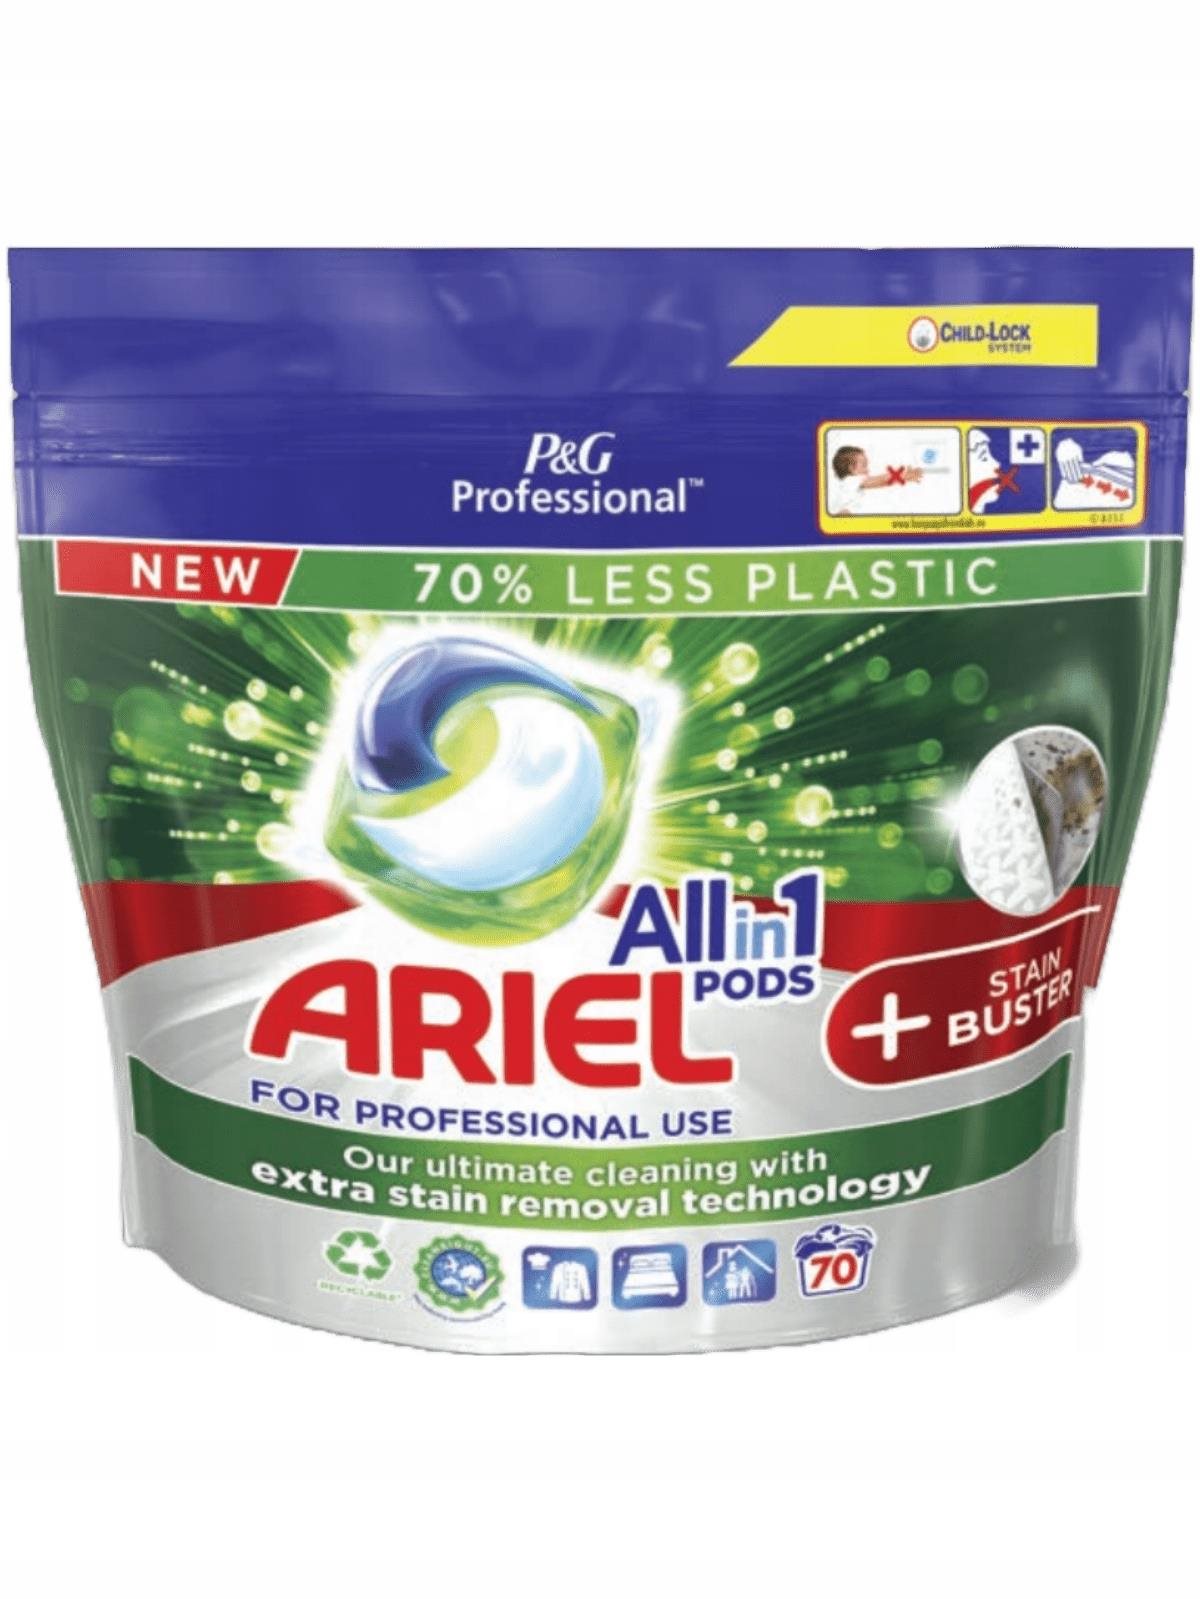 ARIEL+ Stain Buster Professional Universal All-in-1, 70 db